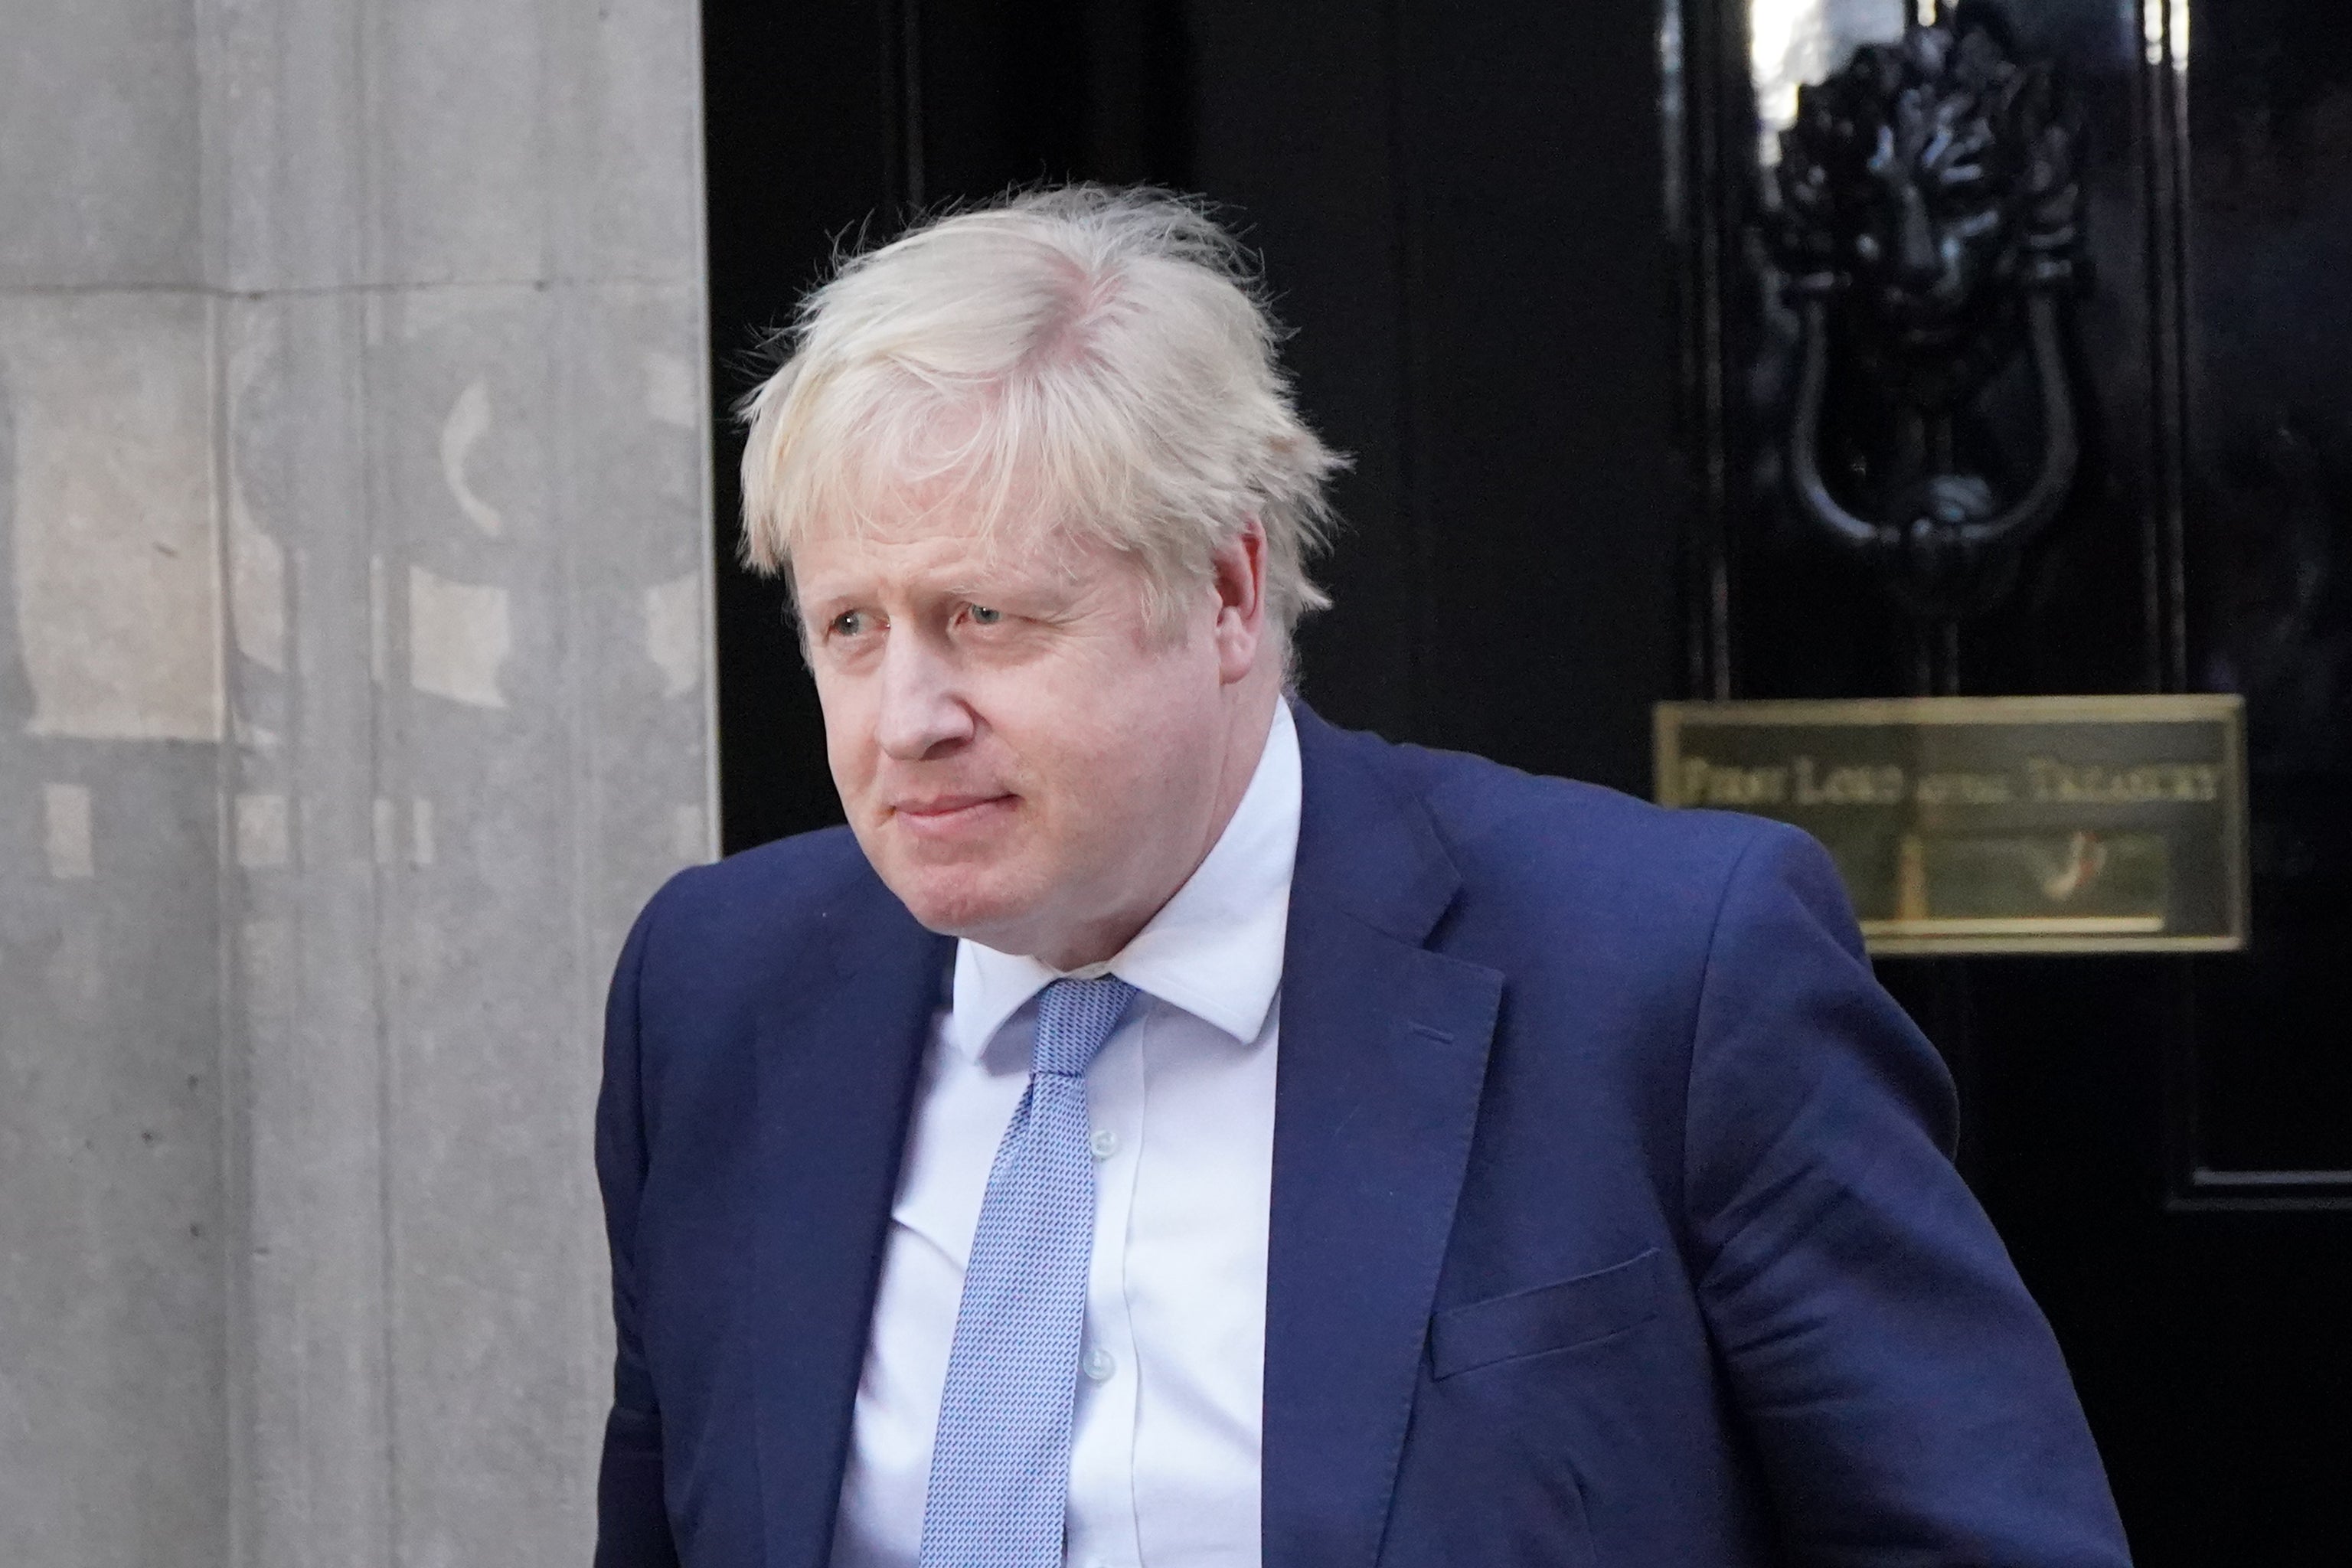 Prime Minister Boris Johnson leaves 10 Downing Street for the House of Commons, where he will make a statement to MPs on the Sue Gray report. (Jonathan Brady/PA)